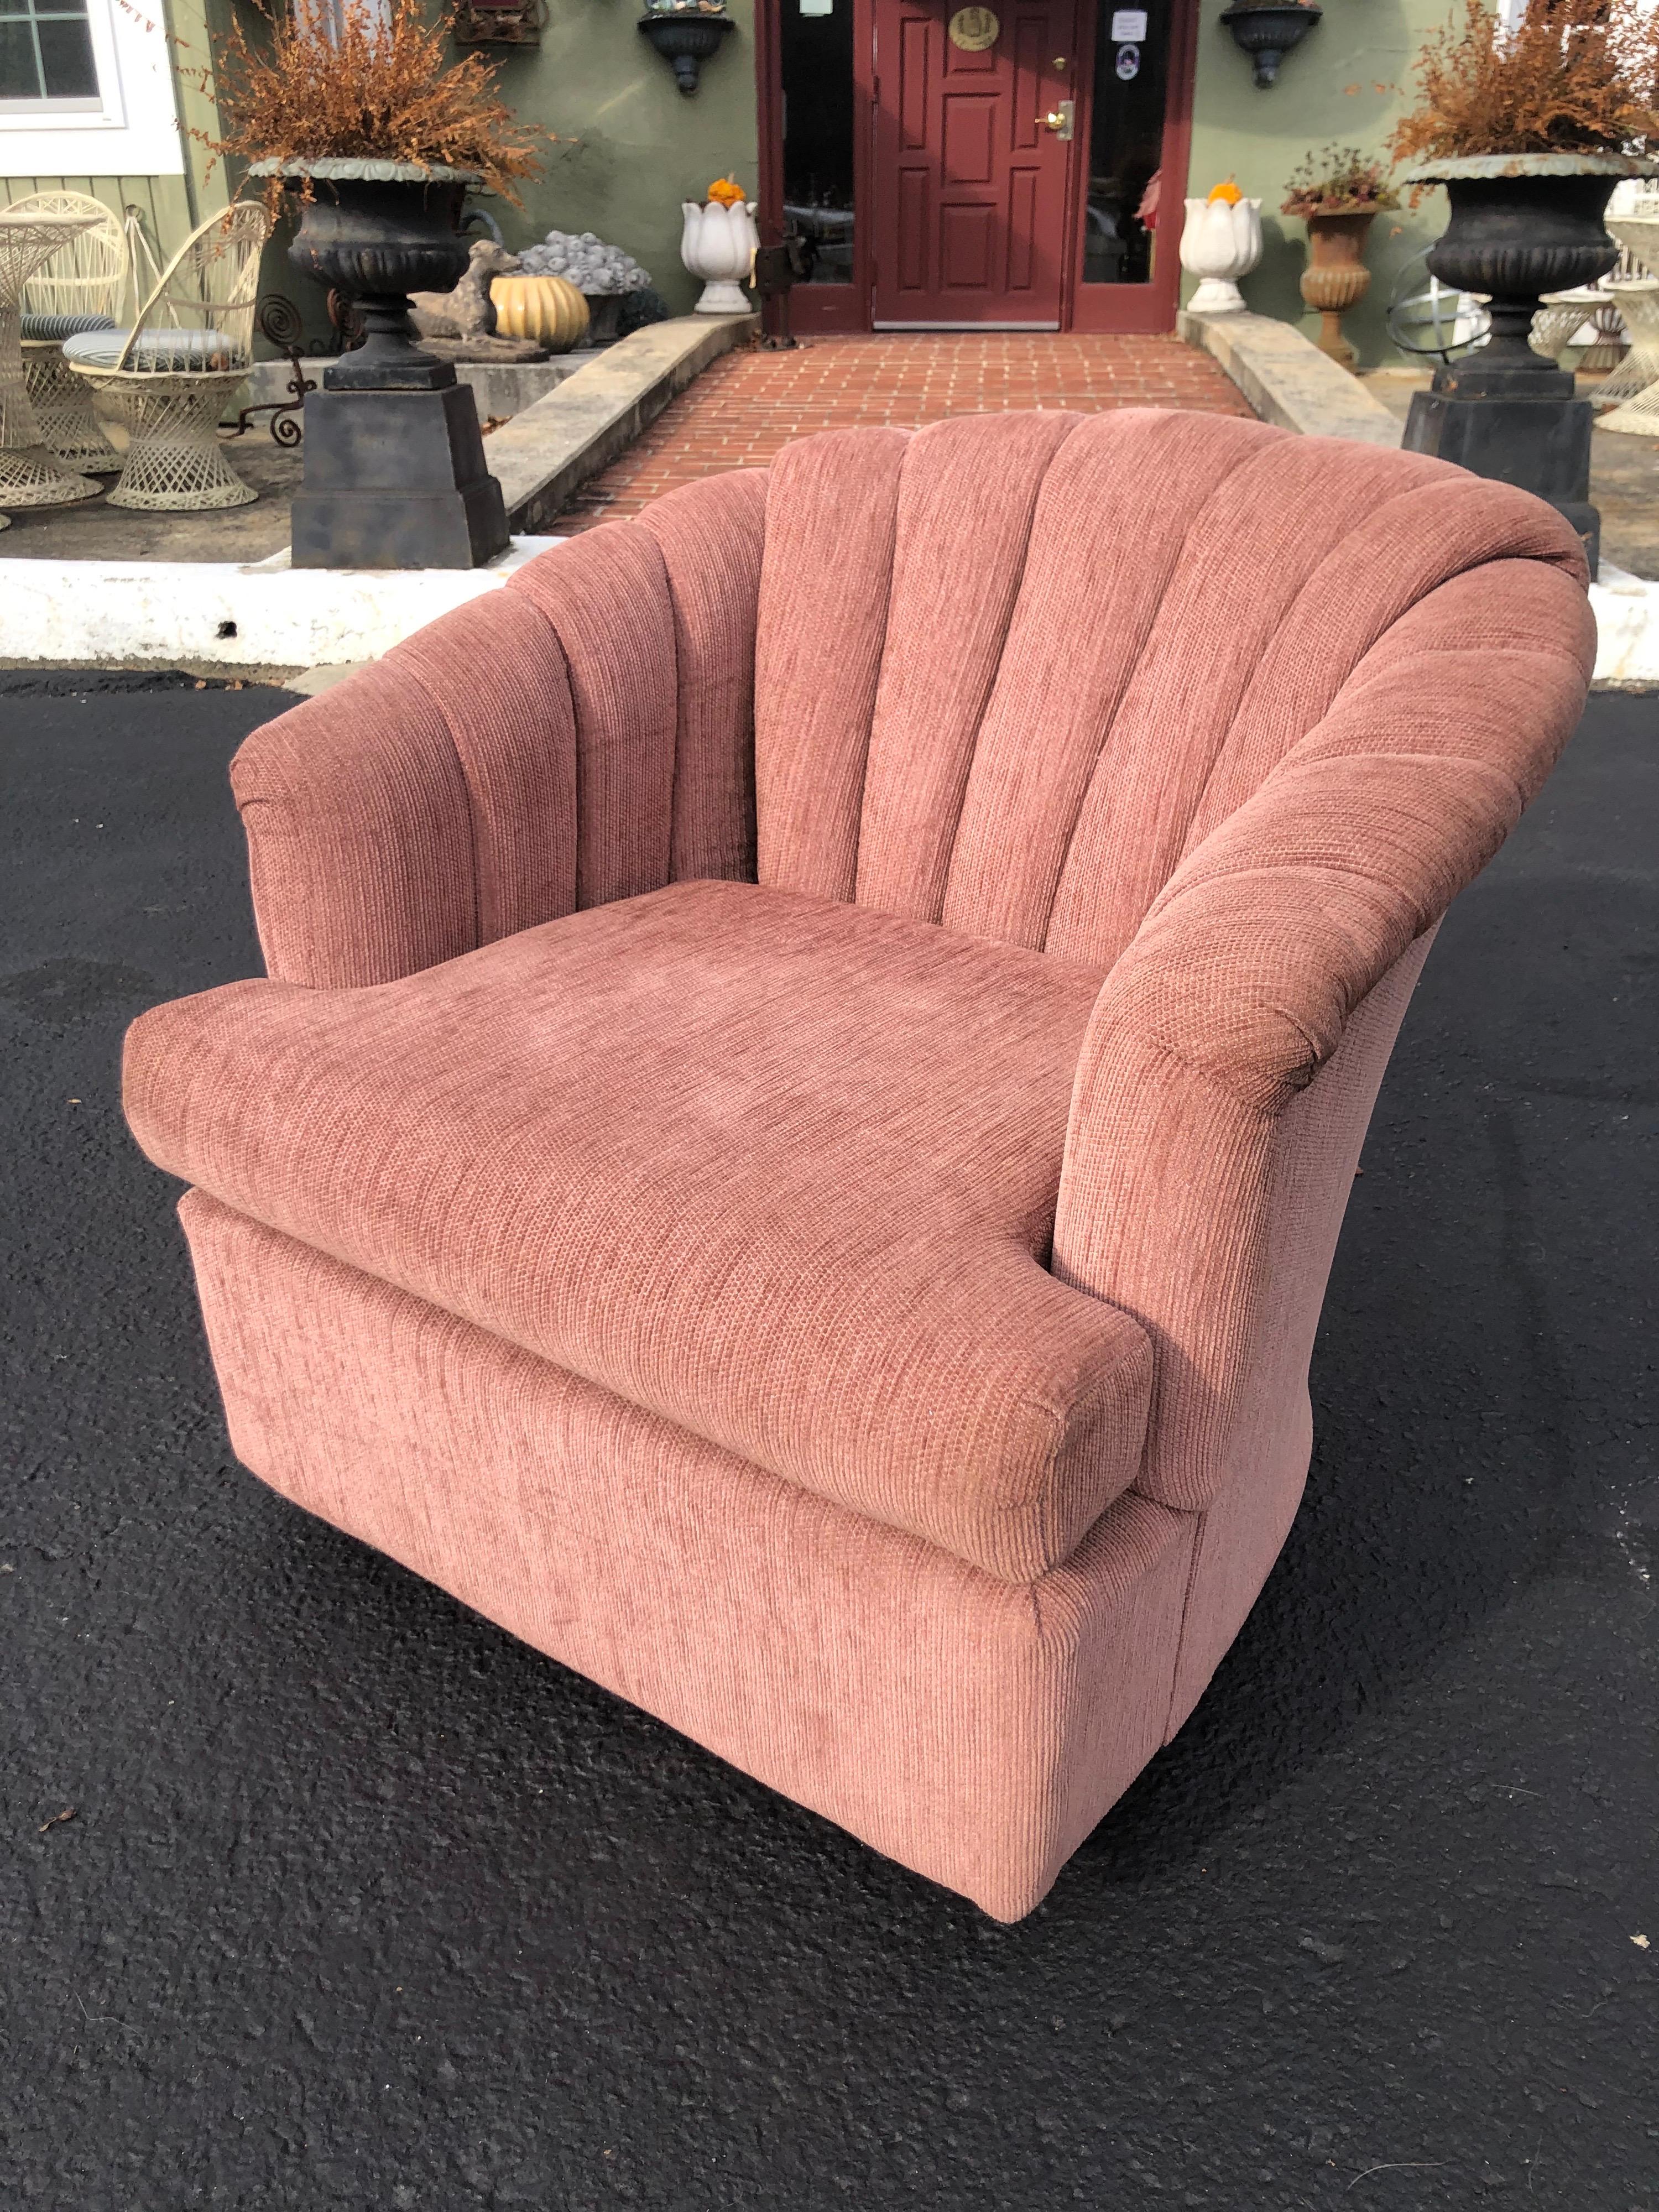 1980's Dusty Rose Swivel chair. Classic channel back barrell shape design . 
Comfortable and good looking. Use as is or recover.
        
    